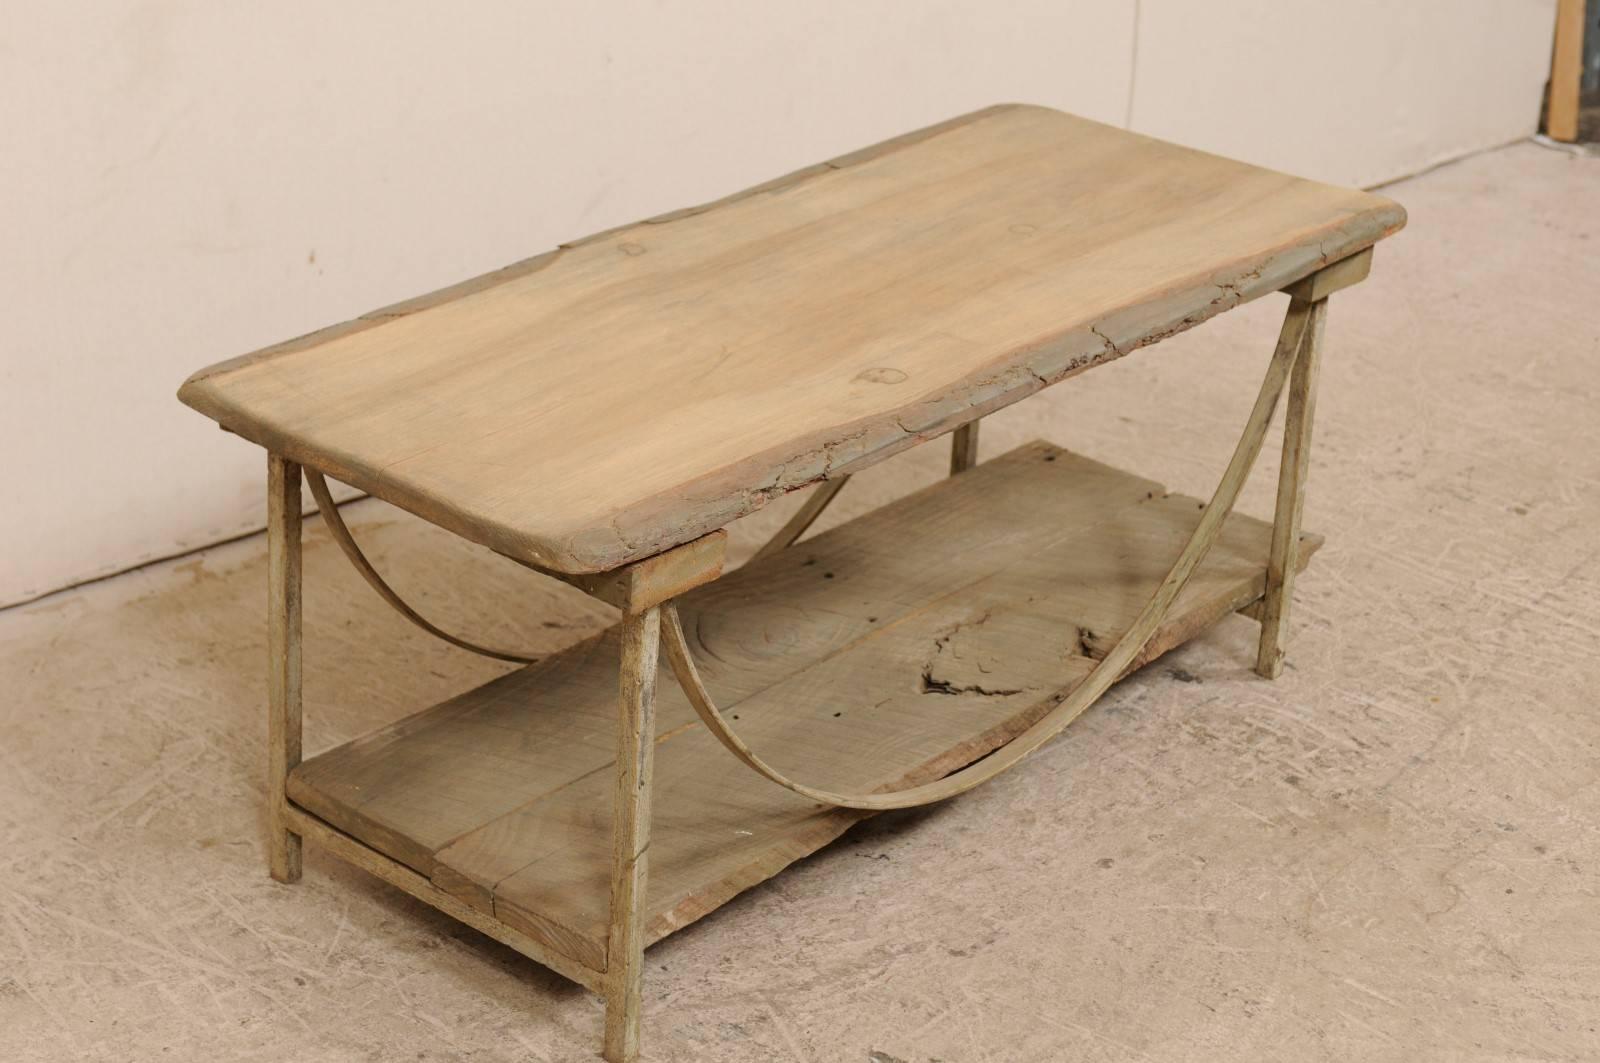 Vintage Sycamore Wood and Painted Iron Rustic Coffee Table in Beige Neutrals 1